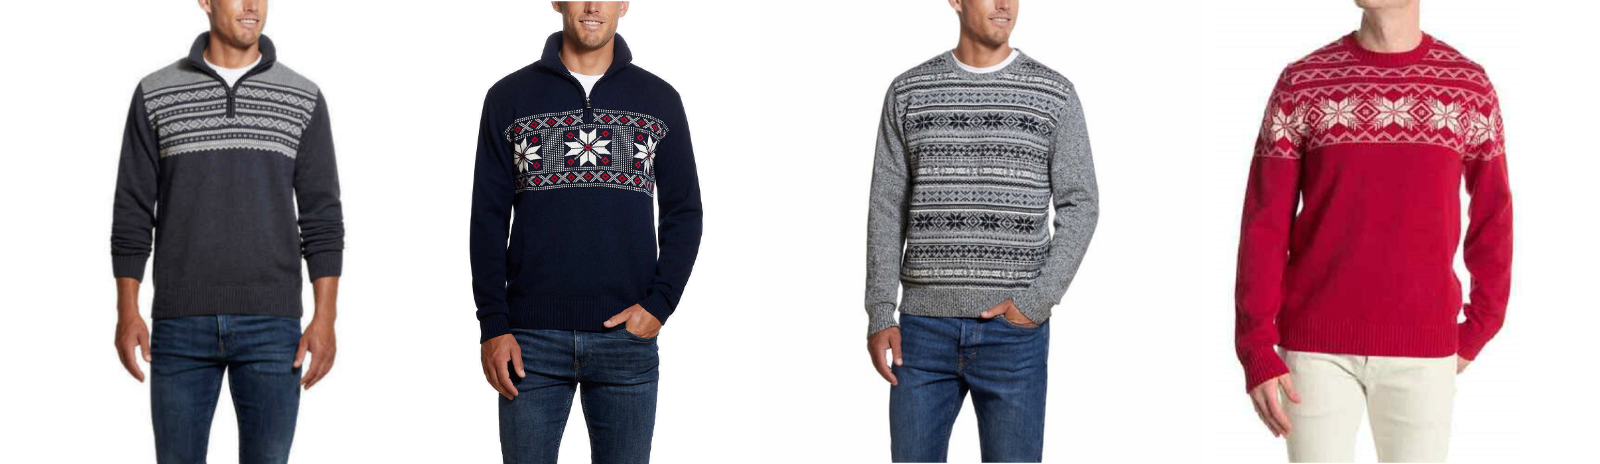 Primary image for Weatherproof Vintage Men's Pullover Sweater